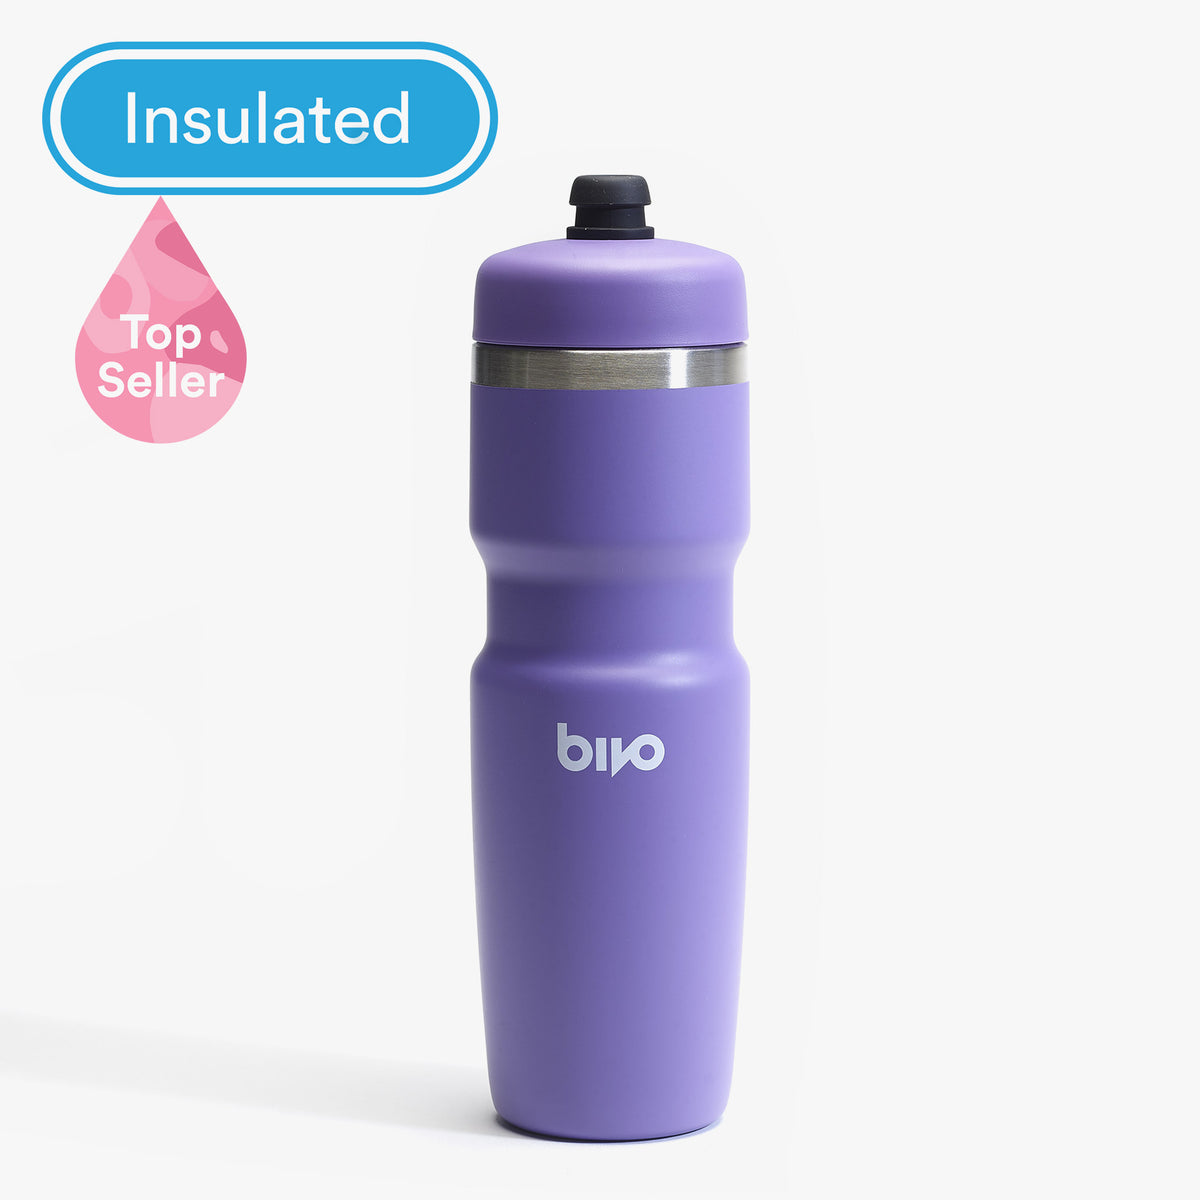 Bivo Insulated Cycling Bottle - 21 oz